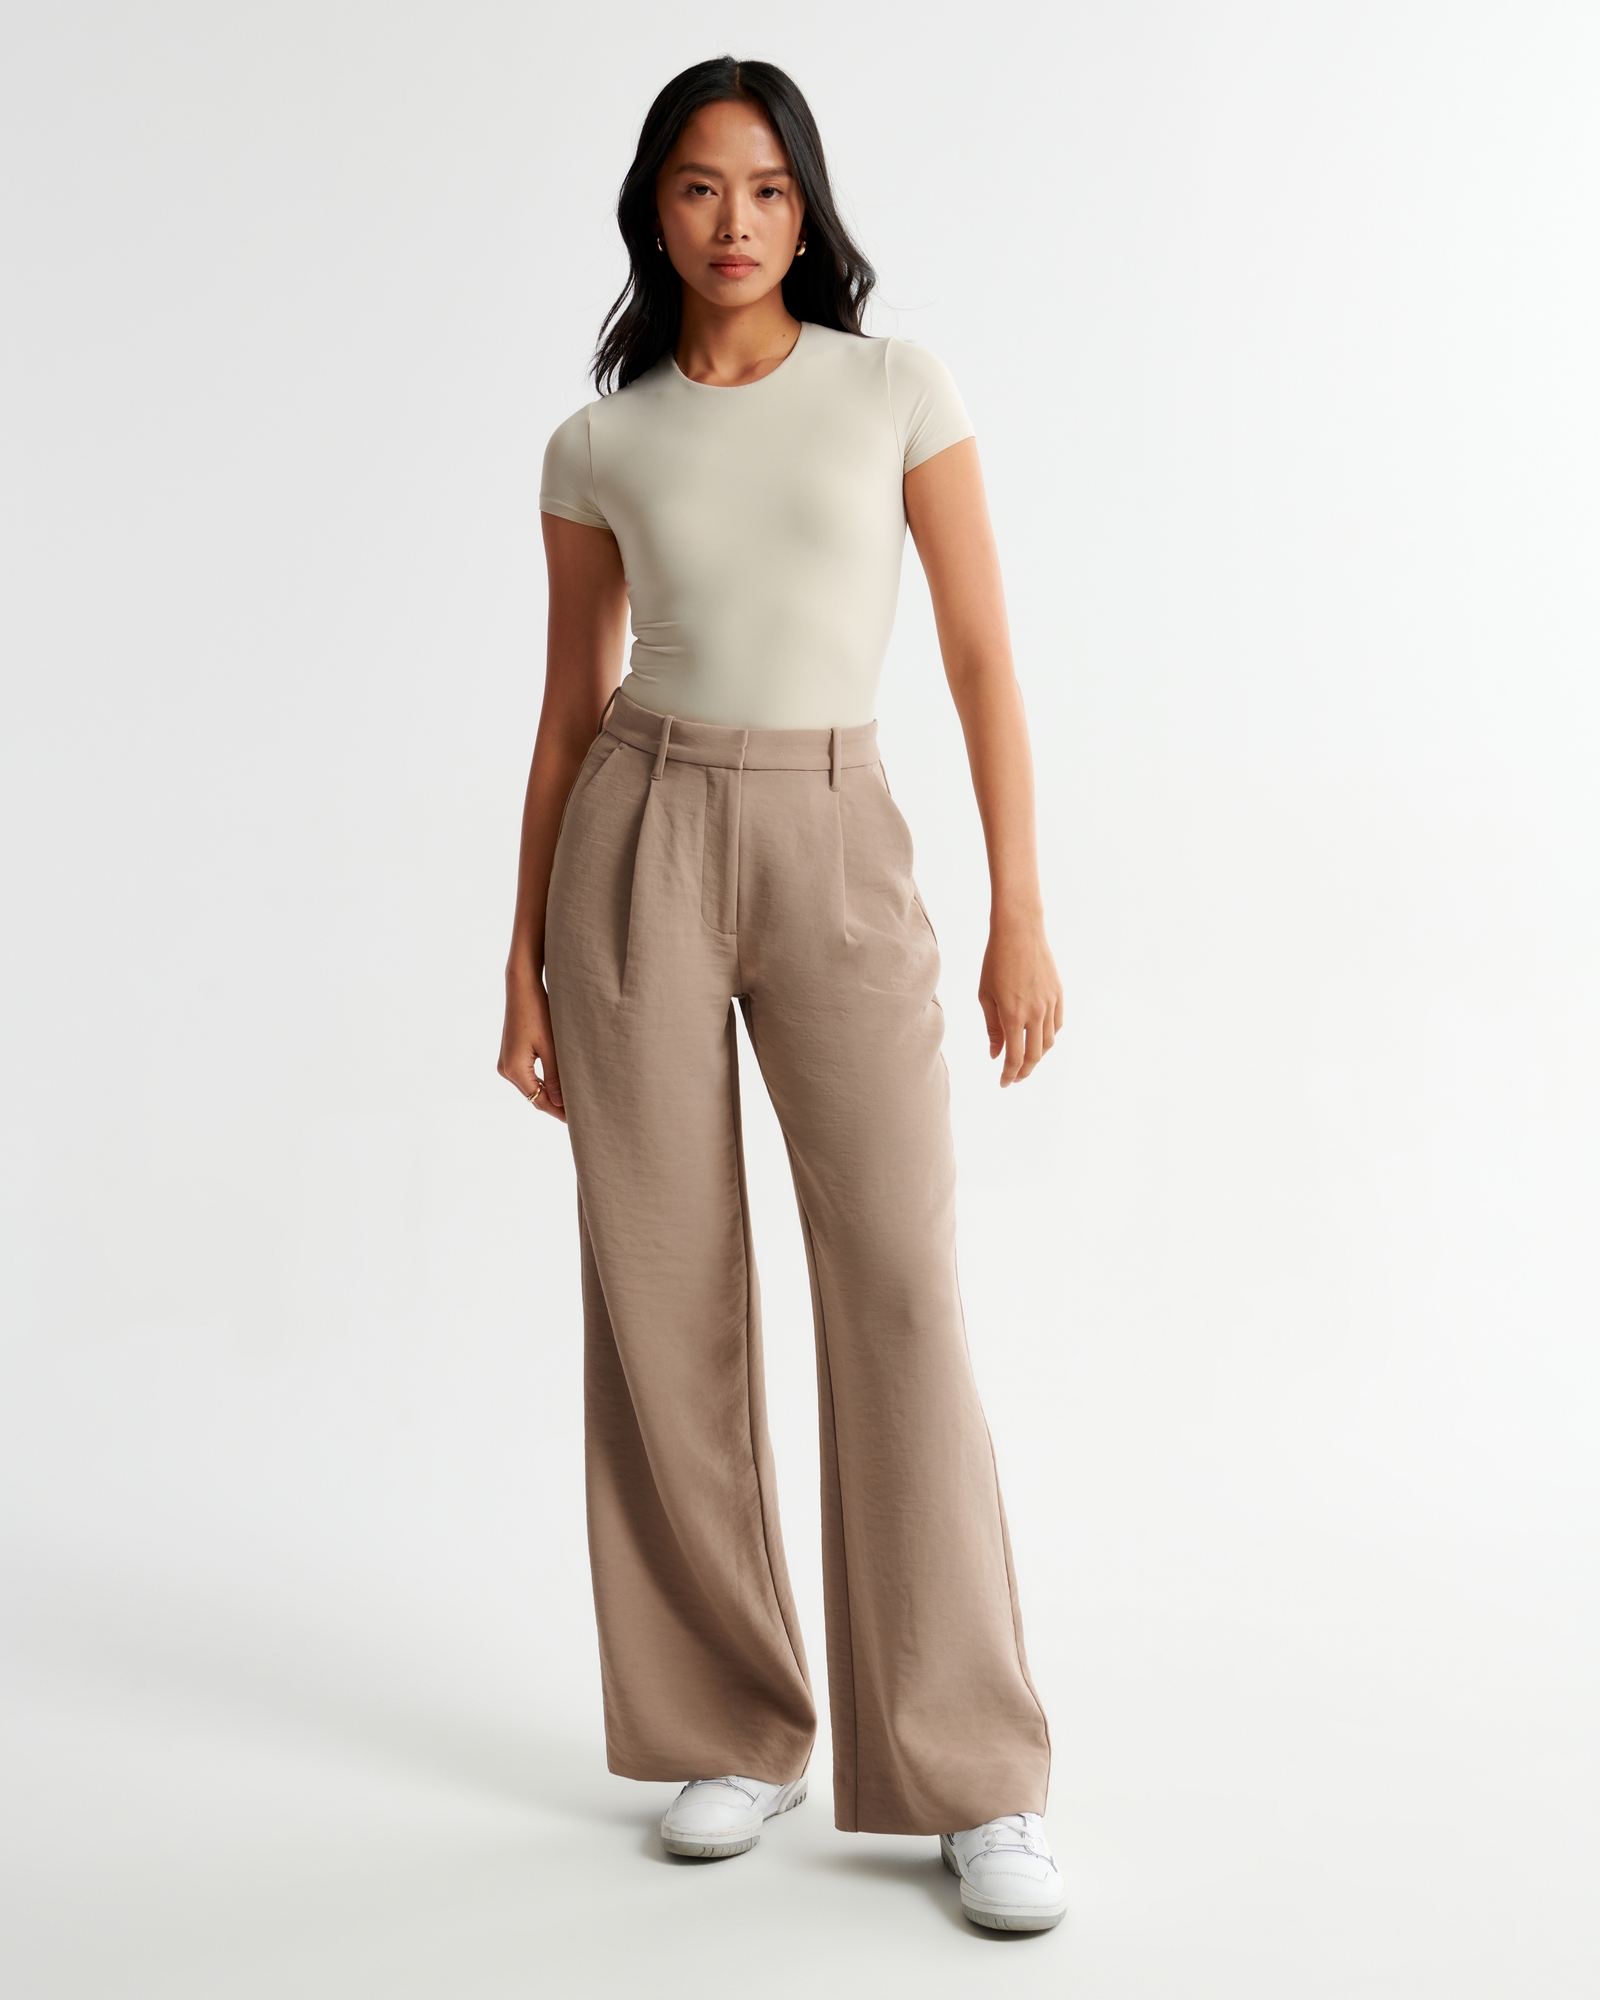 Fashion Look Featuring Abercrombie & Fitch Bodysuits and Abercrombie &  Fitch Wide-Leg Pants by MrsCEOJ - ShopStyle